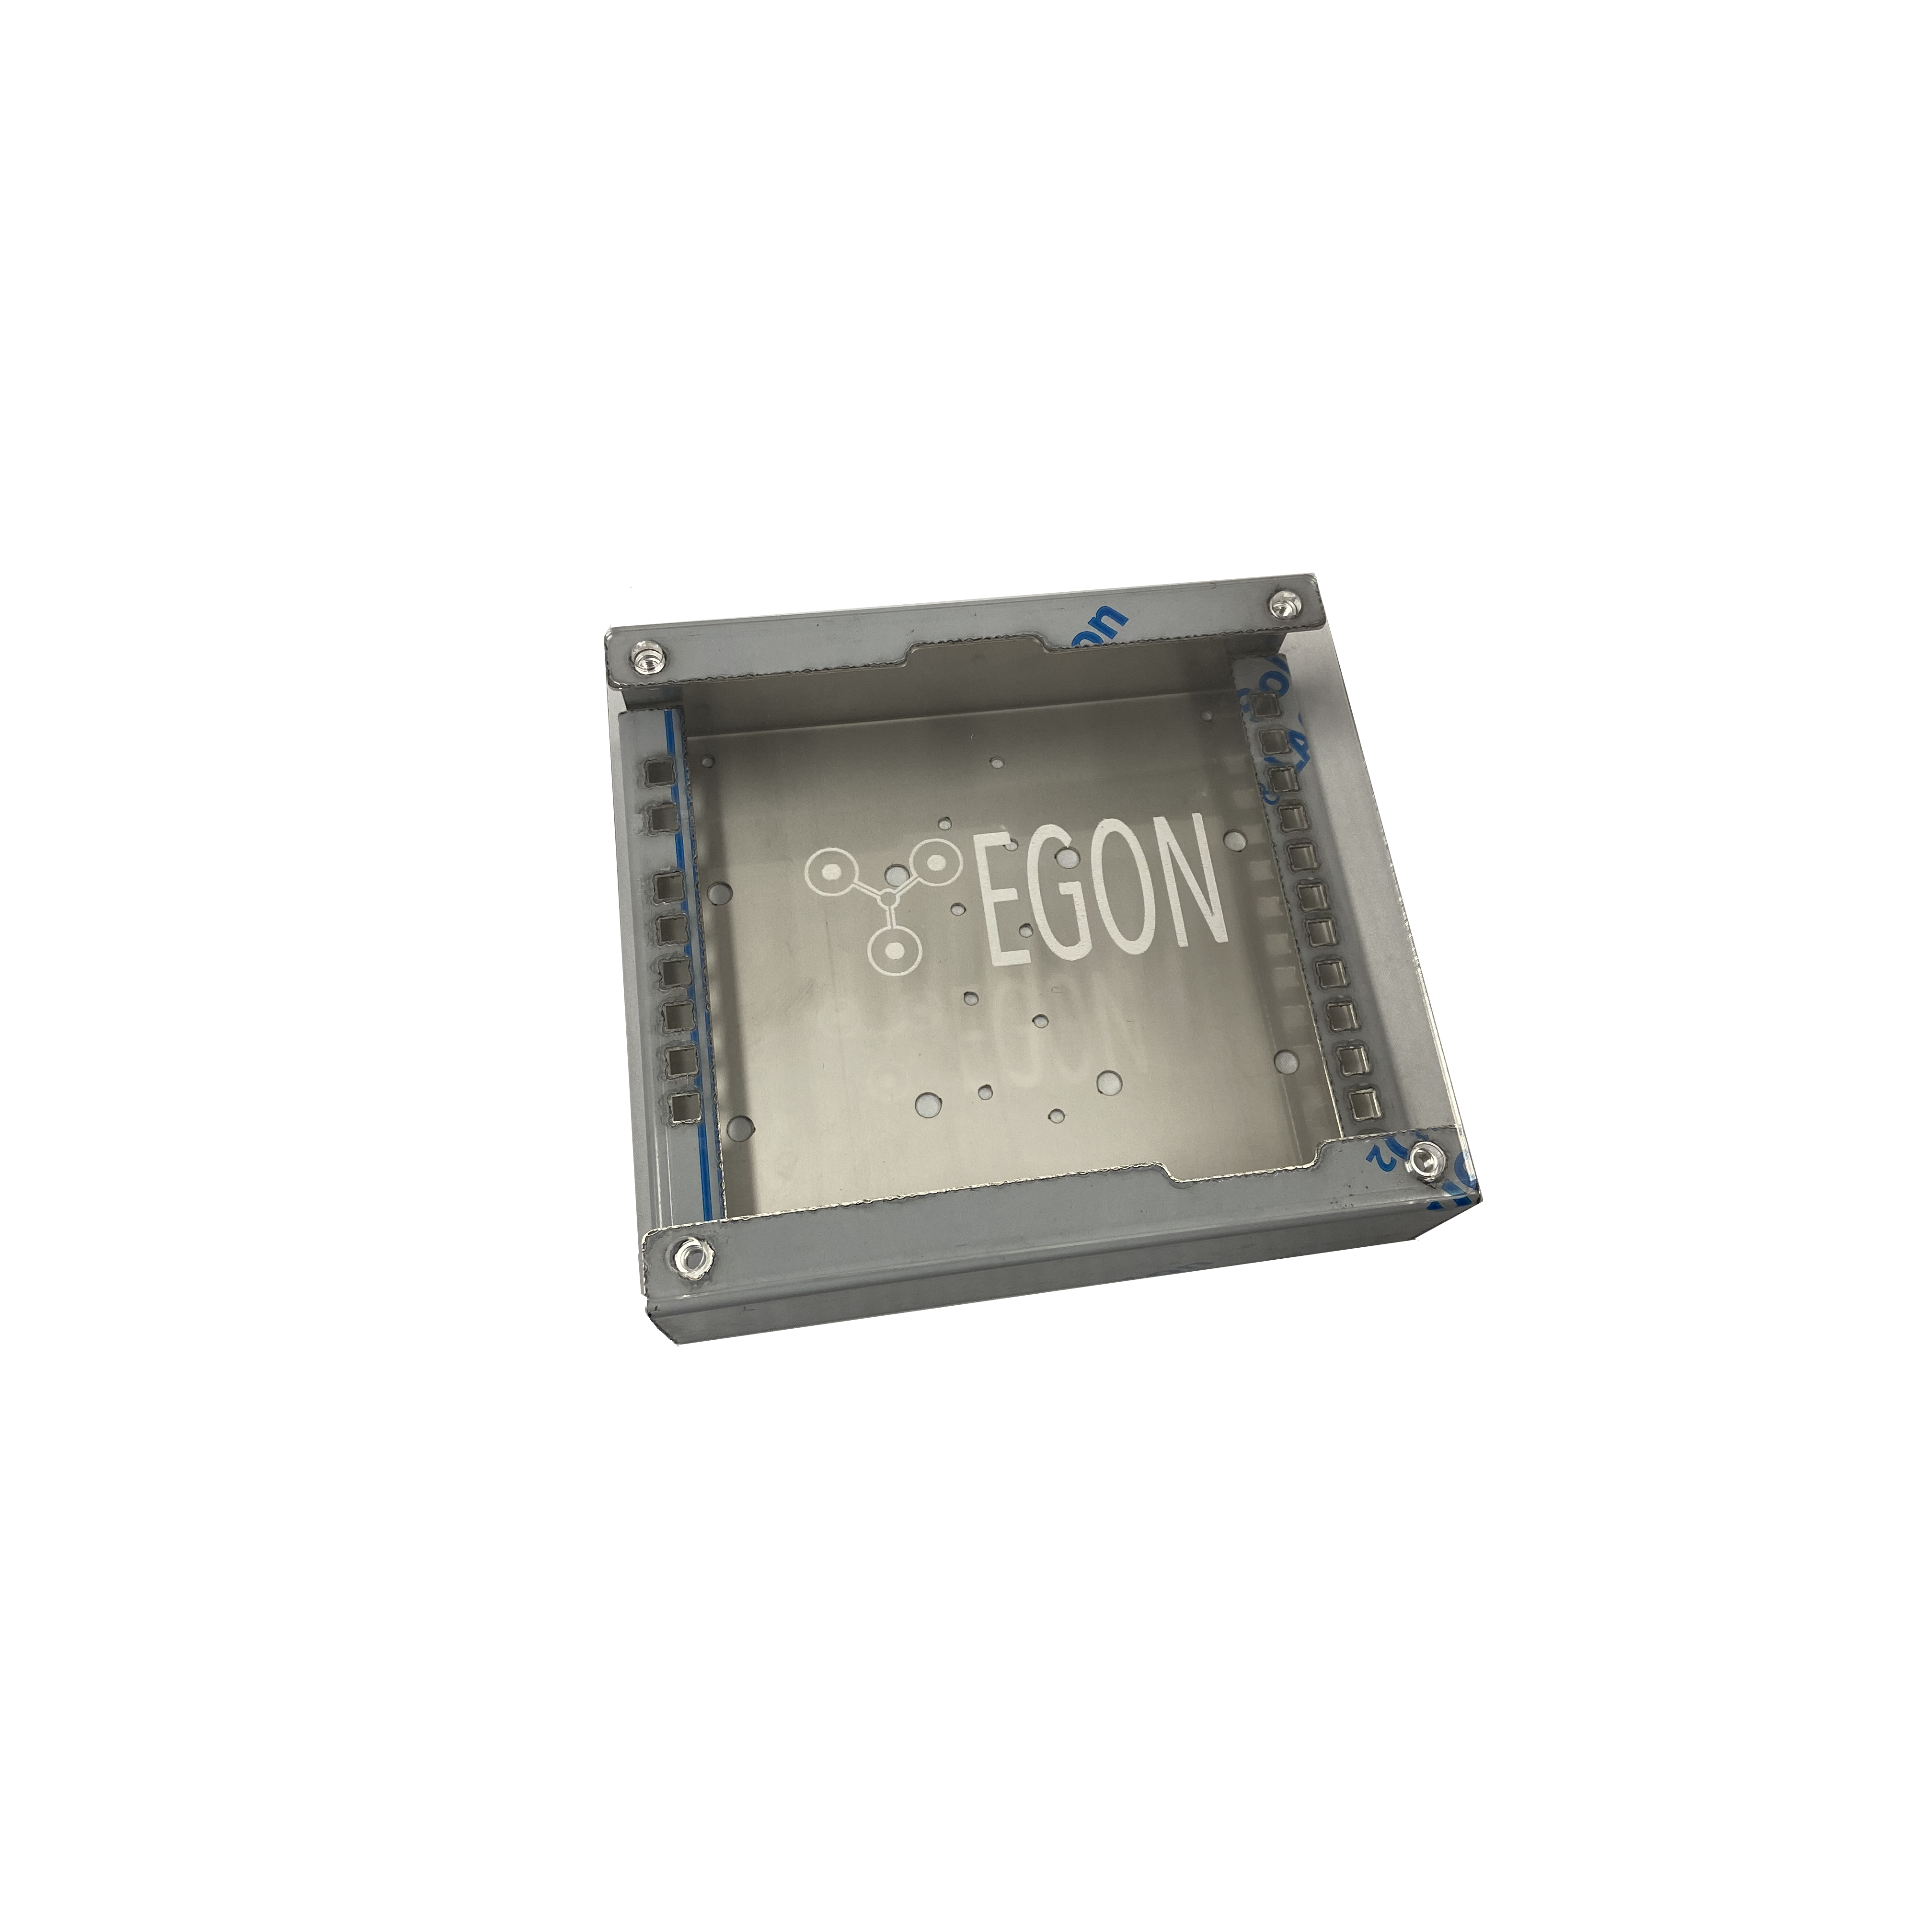 Egon RELAY-Hub Bracket and Cover ONLY